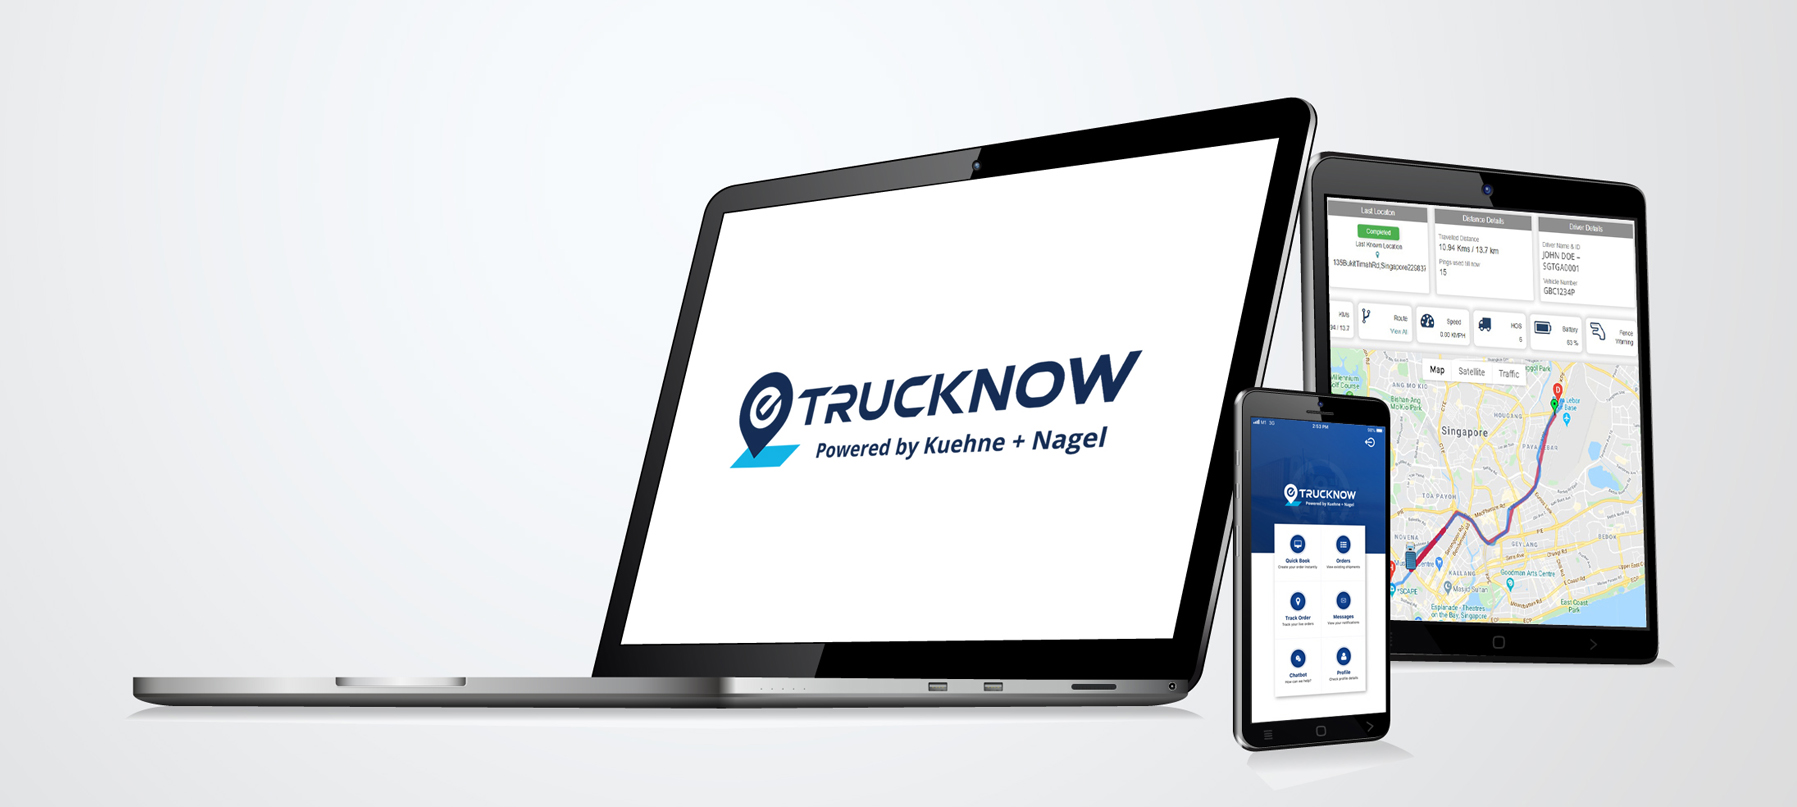 Full visibility and control over your shipment via our online trucking ecosystem eTrucknow